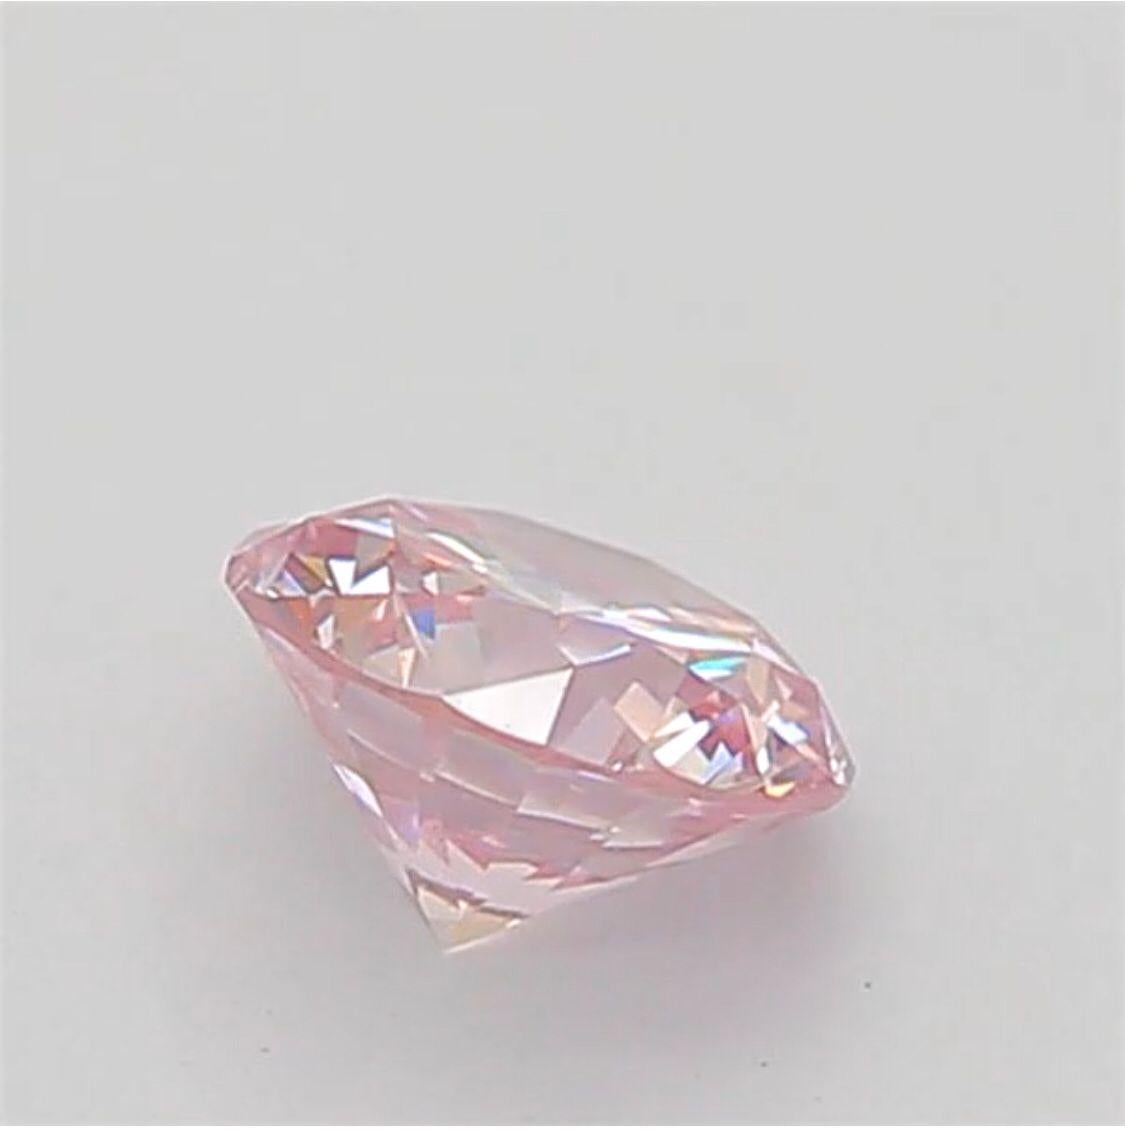 0.20 Carat Very Light Pink Round Shaped Diamond VS1 Clarity CGL Certified For Sale 2